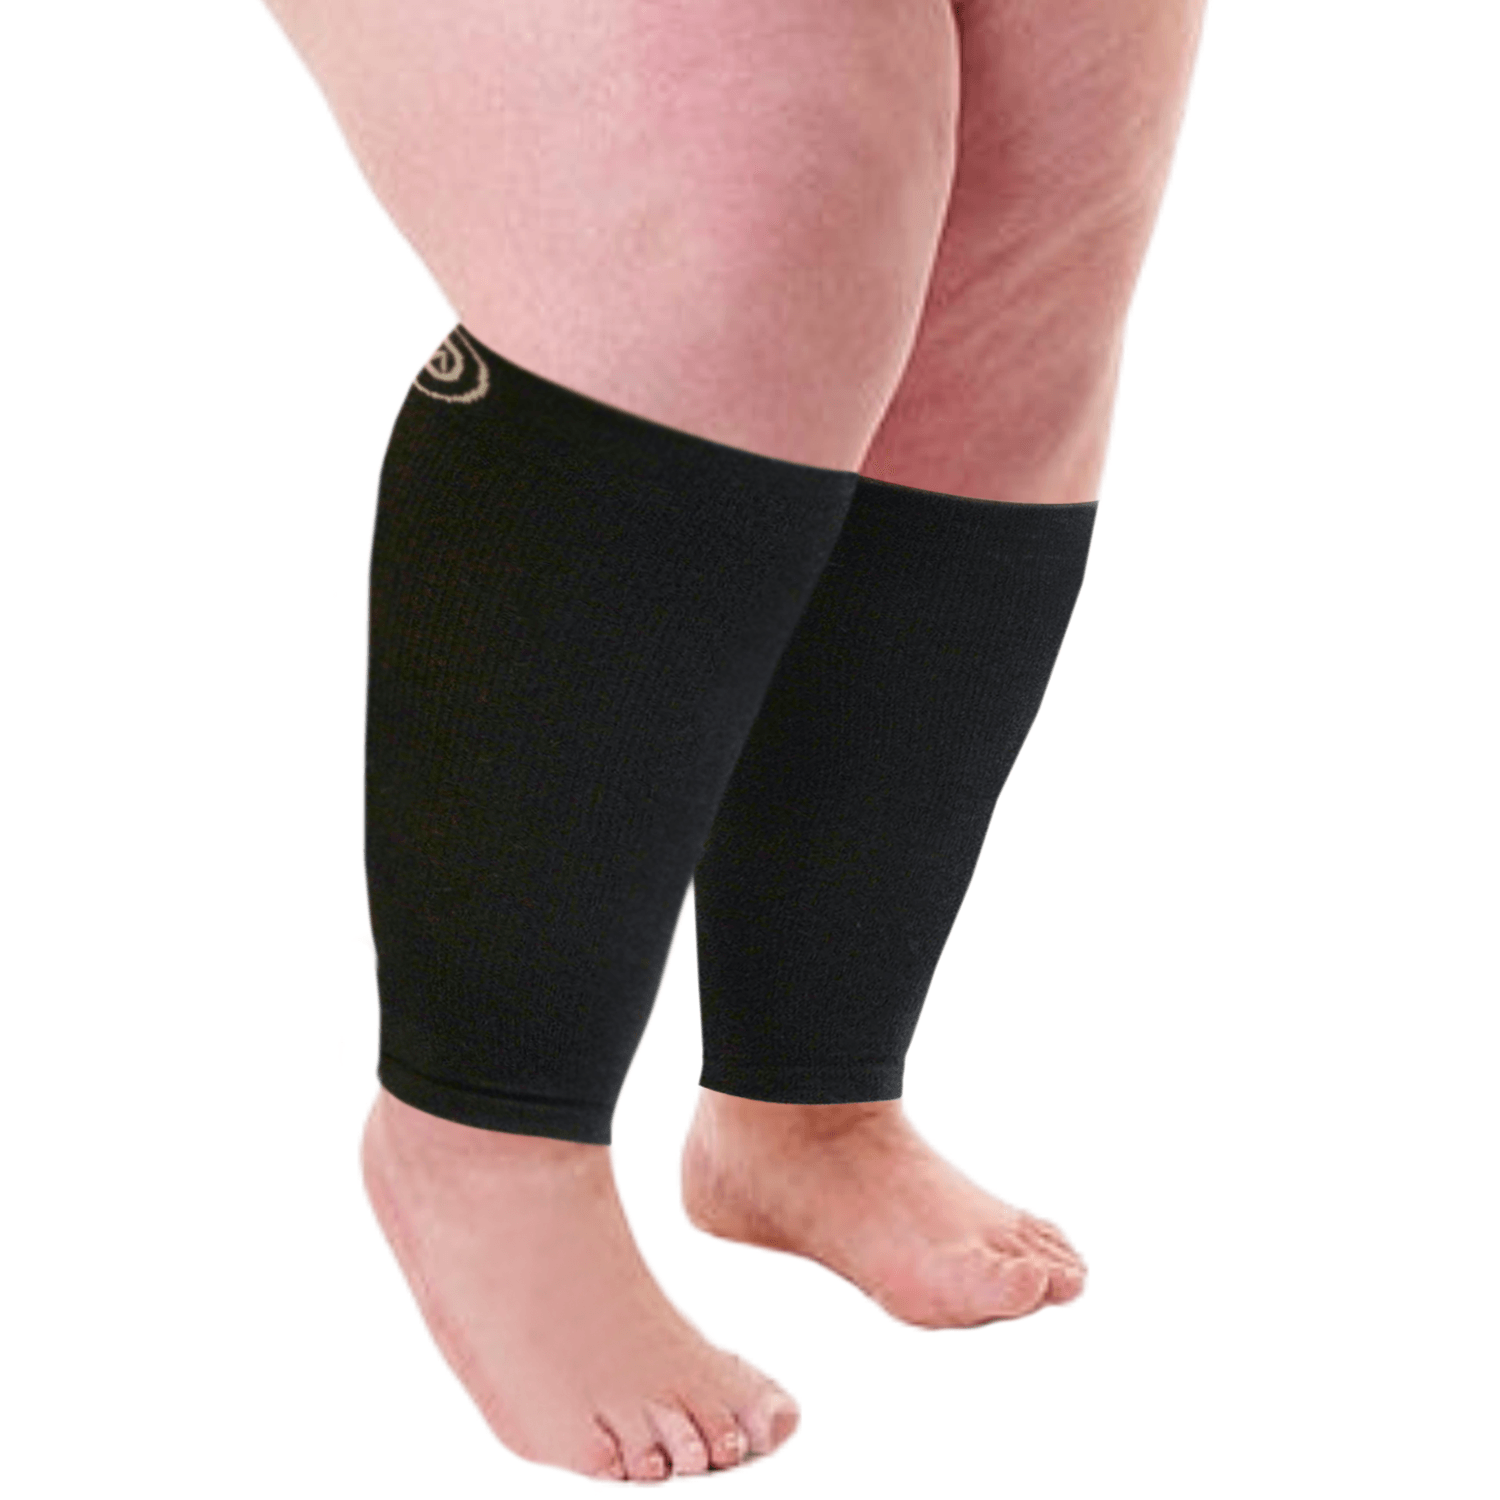 Big Size Compression Stockings Plus Size One Pair Compression